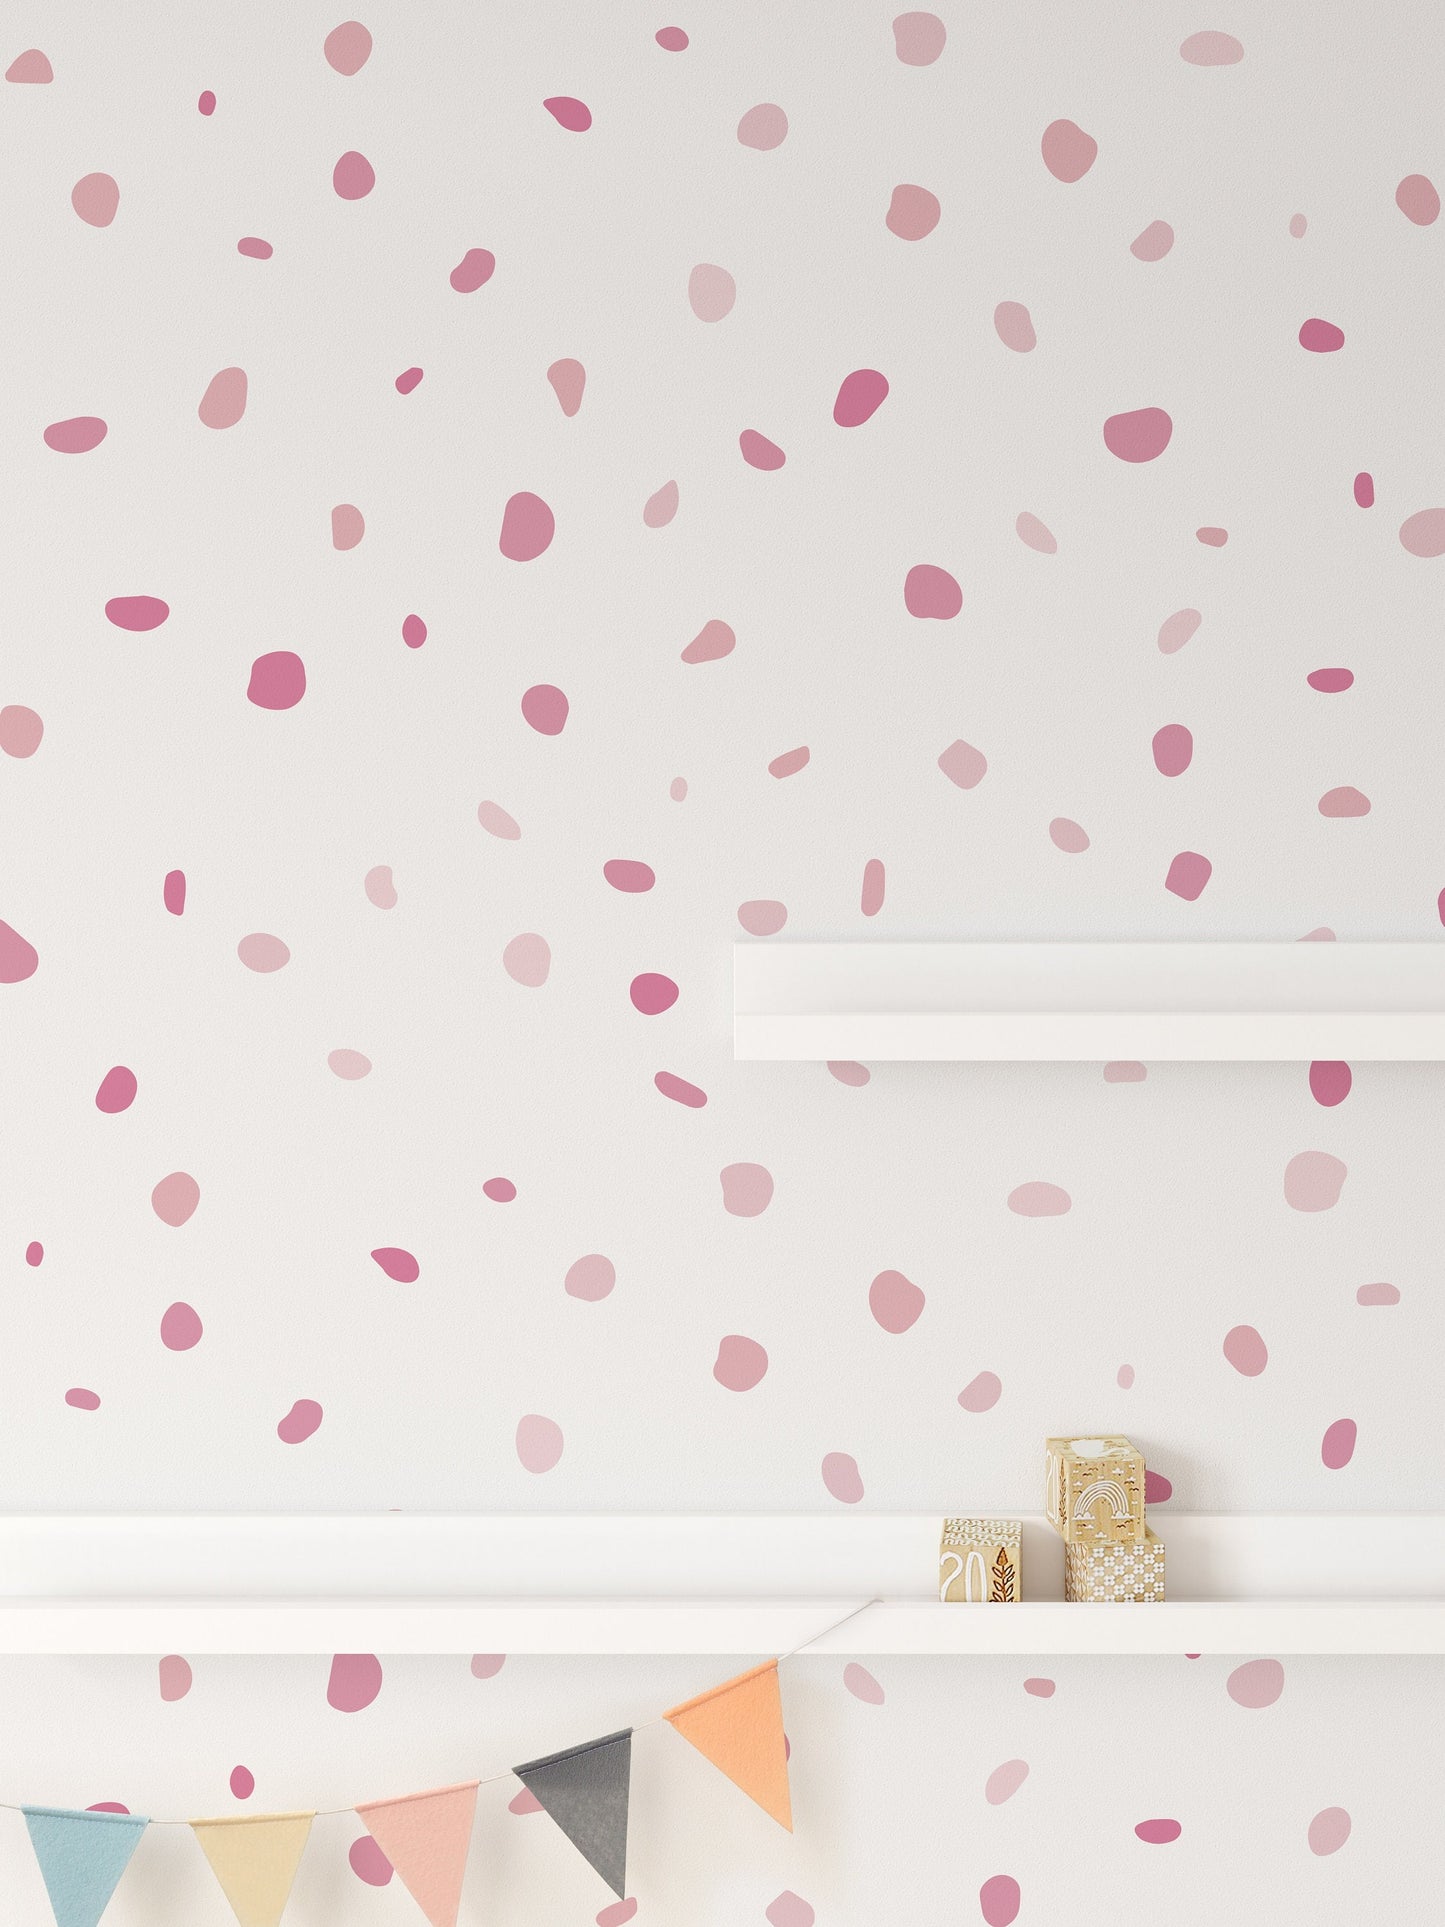 Pink Shades Polka Dot Wall Decal Stickers Removable Pastel Wall Decor For Kids Rooms, Nurseries, Children's Bedrooms